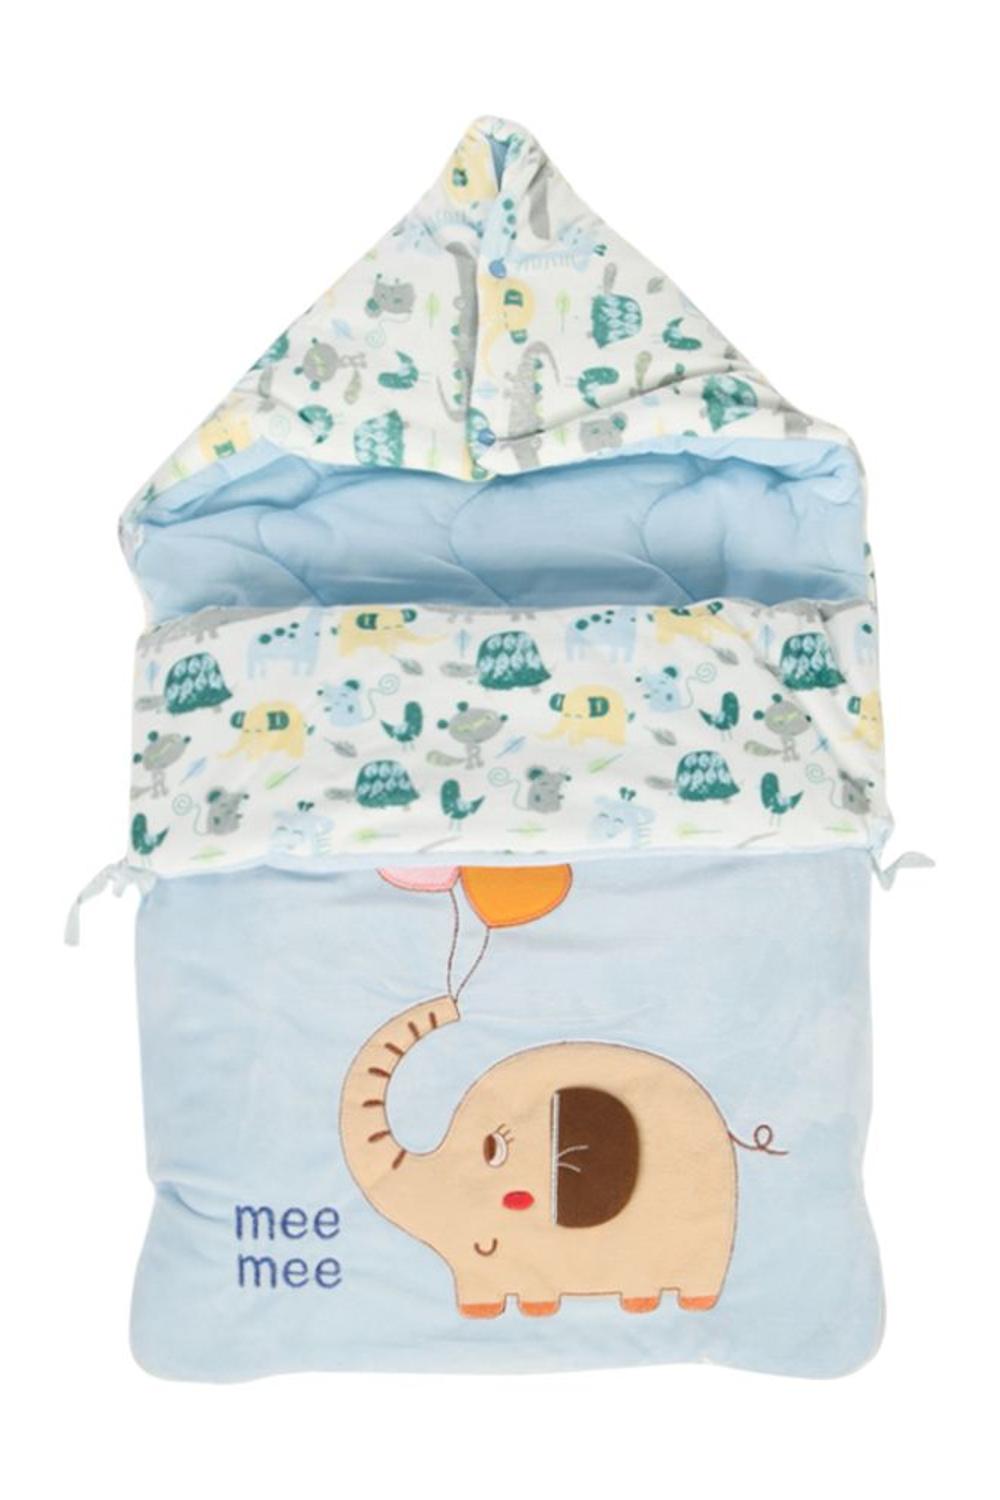 Mee Mee 3 in 1 Baby Carry Nest with Sleeping Bag and Mattress for Babies (Blue) (Blue Teddy Print)